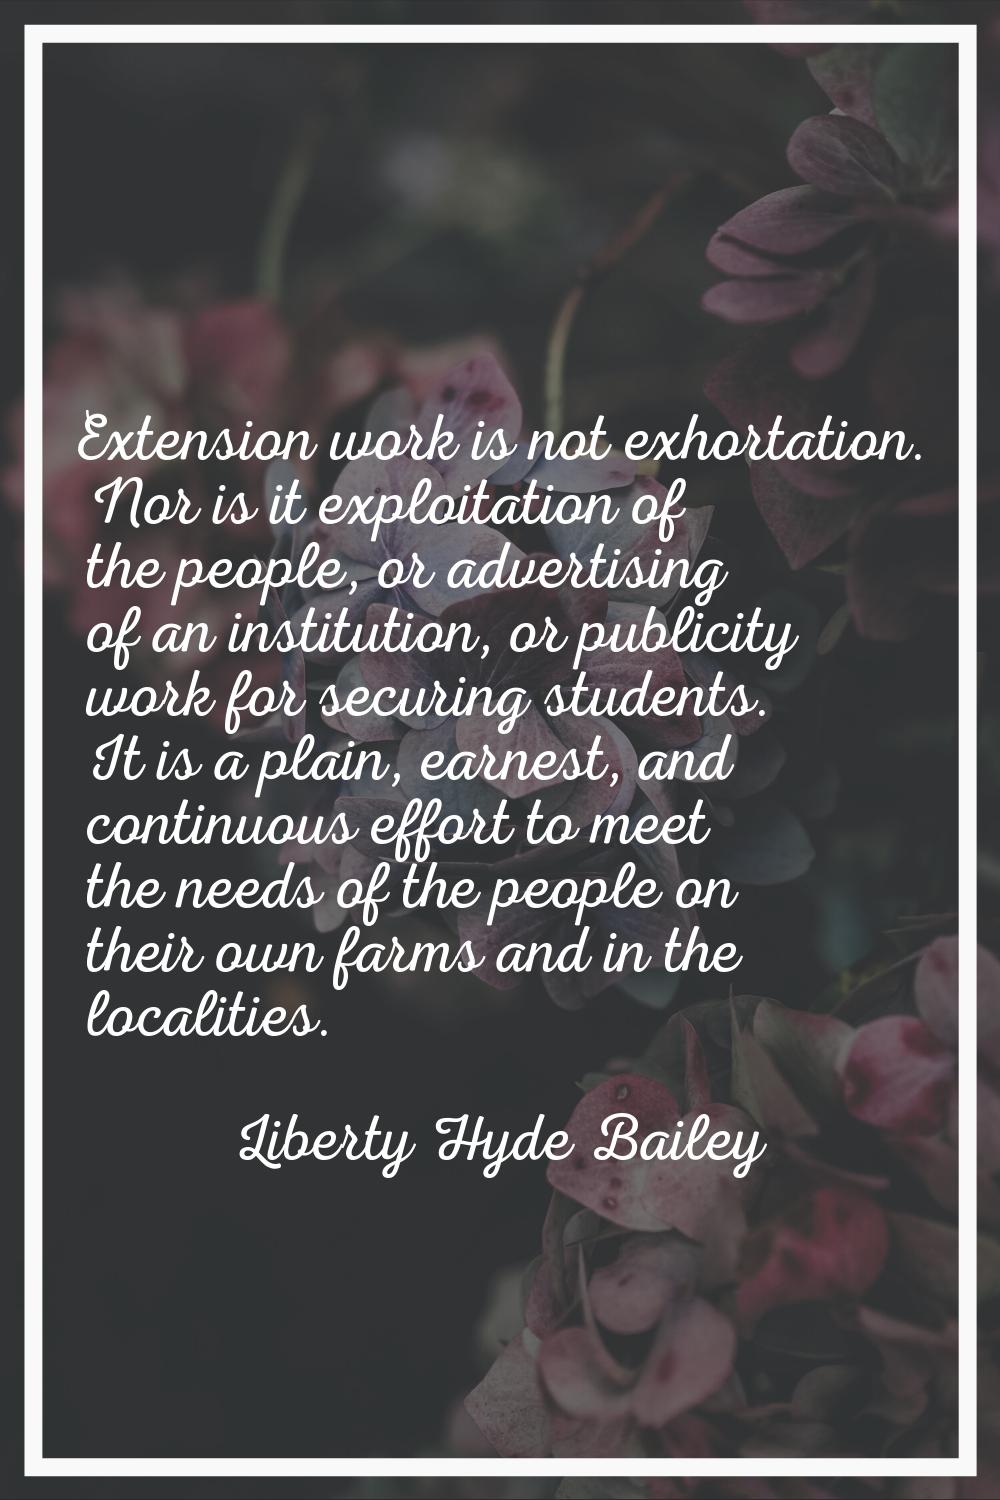 Extension work is not exhortation. Nor is it exploitation of the people, or advertising of an insti